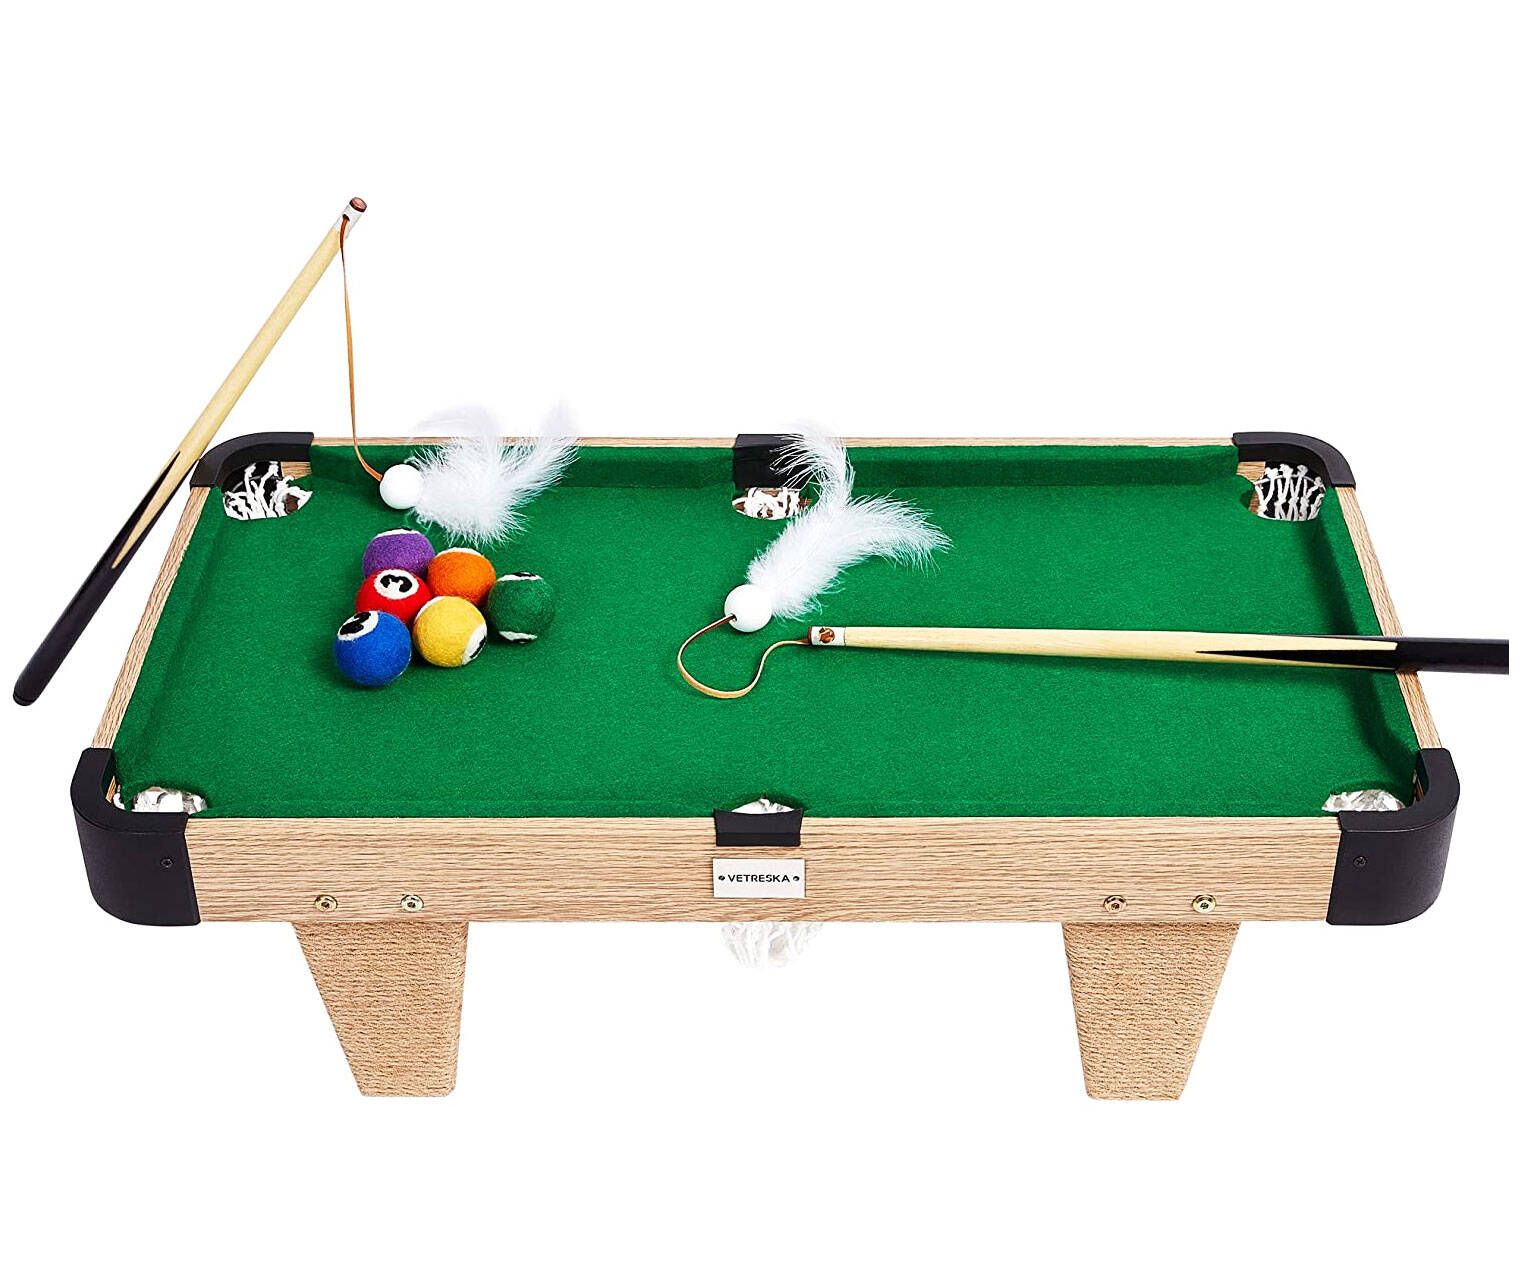 Cat Billiards Table - coolthings.us